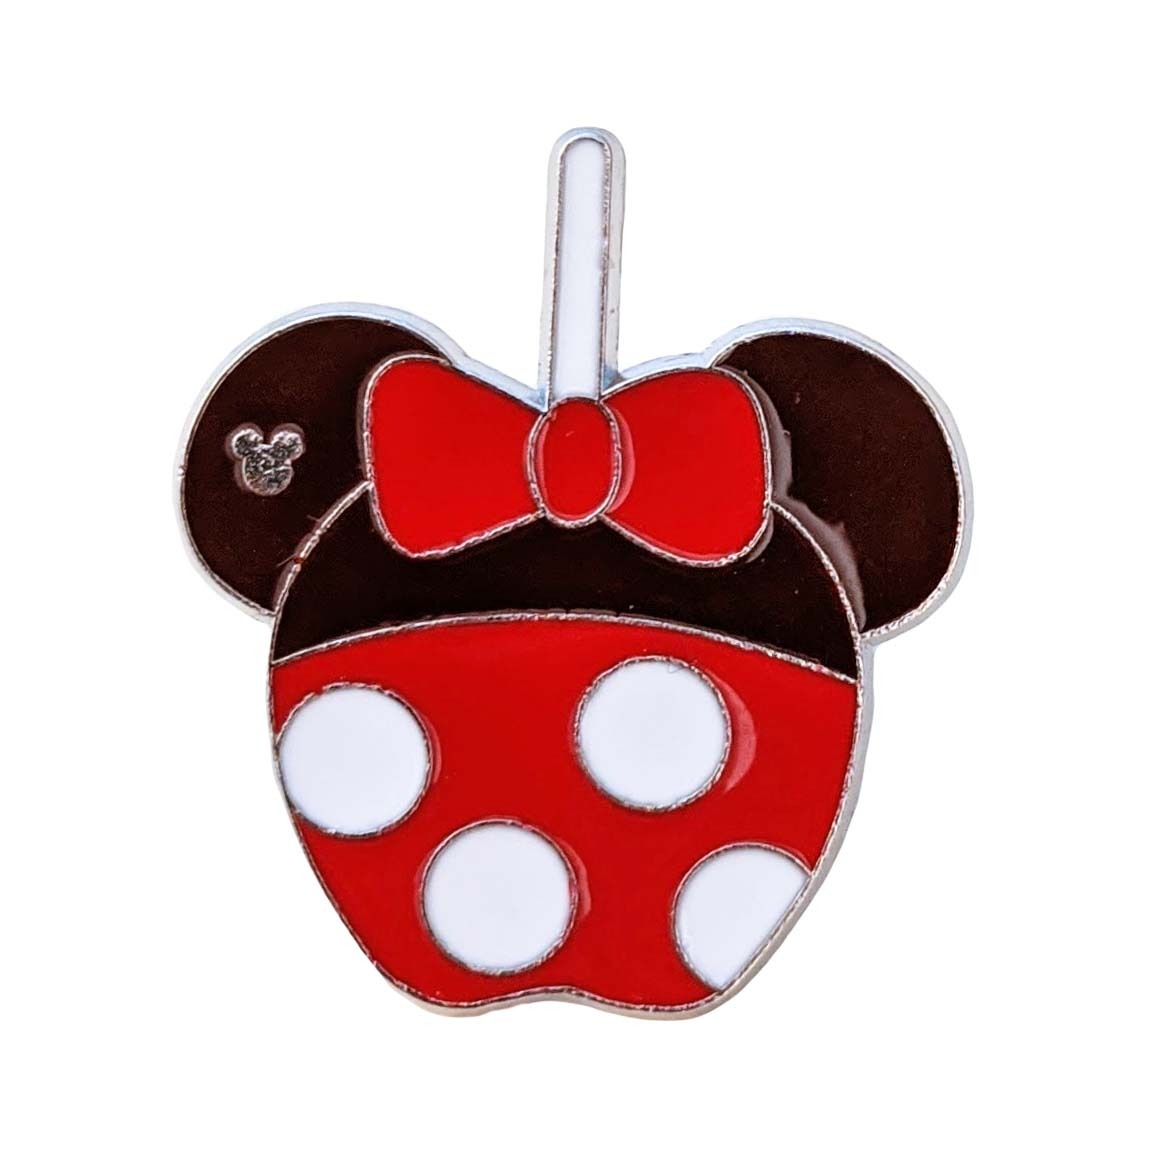 Minnie Mouse Disney Lapel Pin: Candy Apple - Minnie Mouse